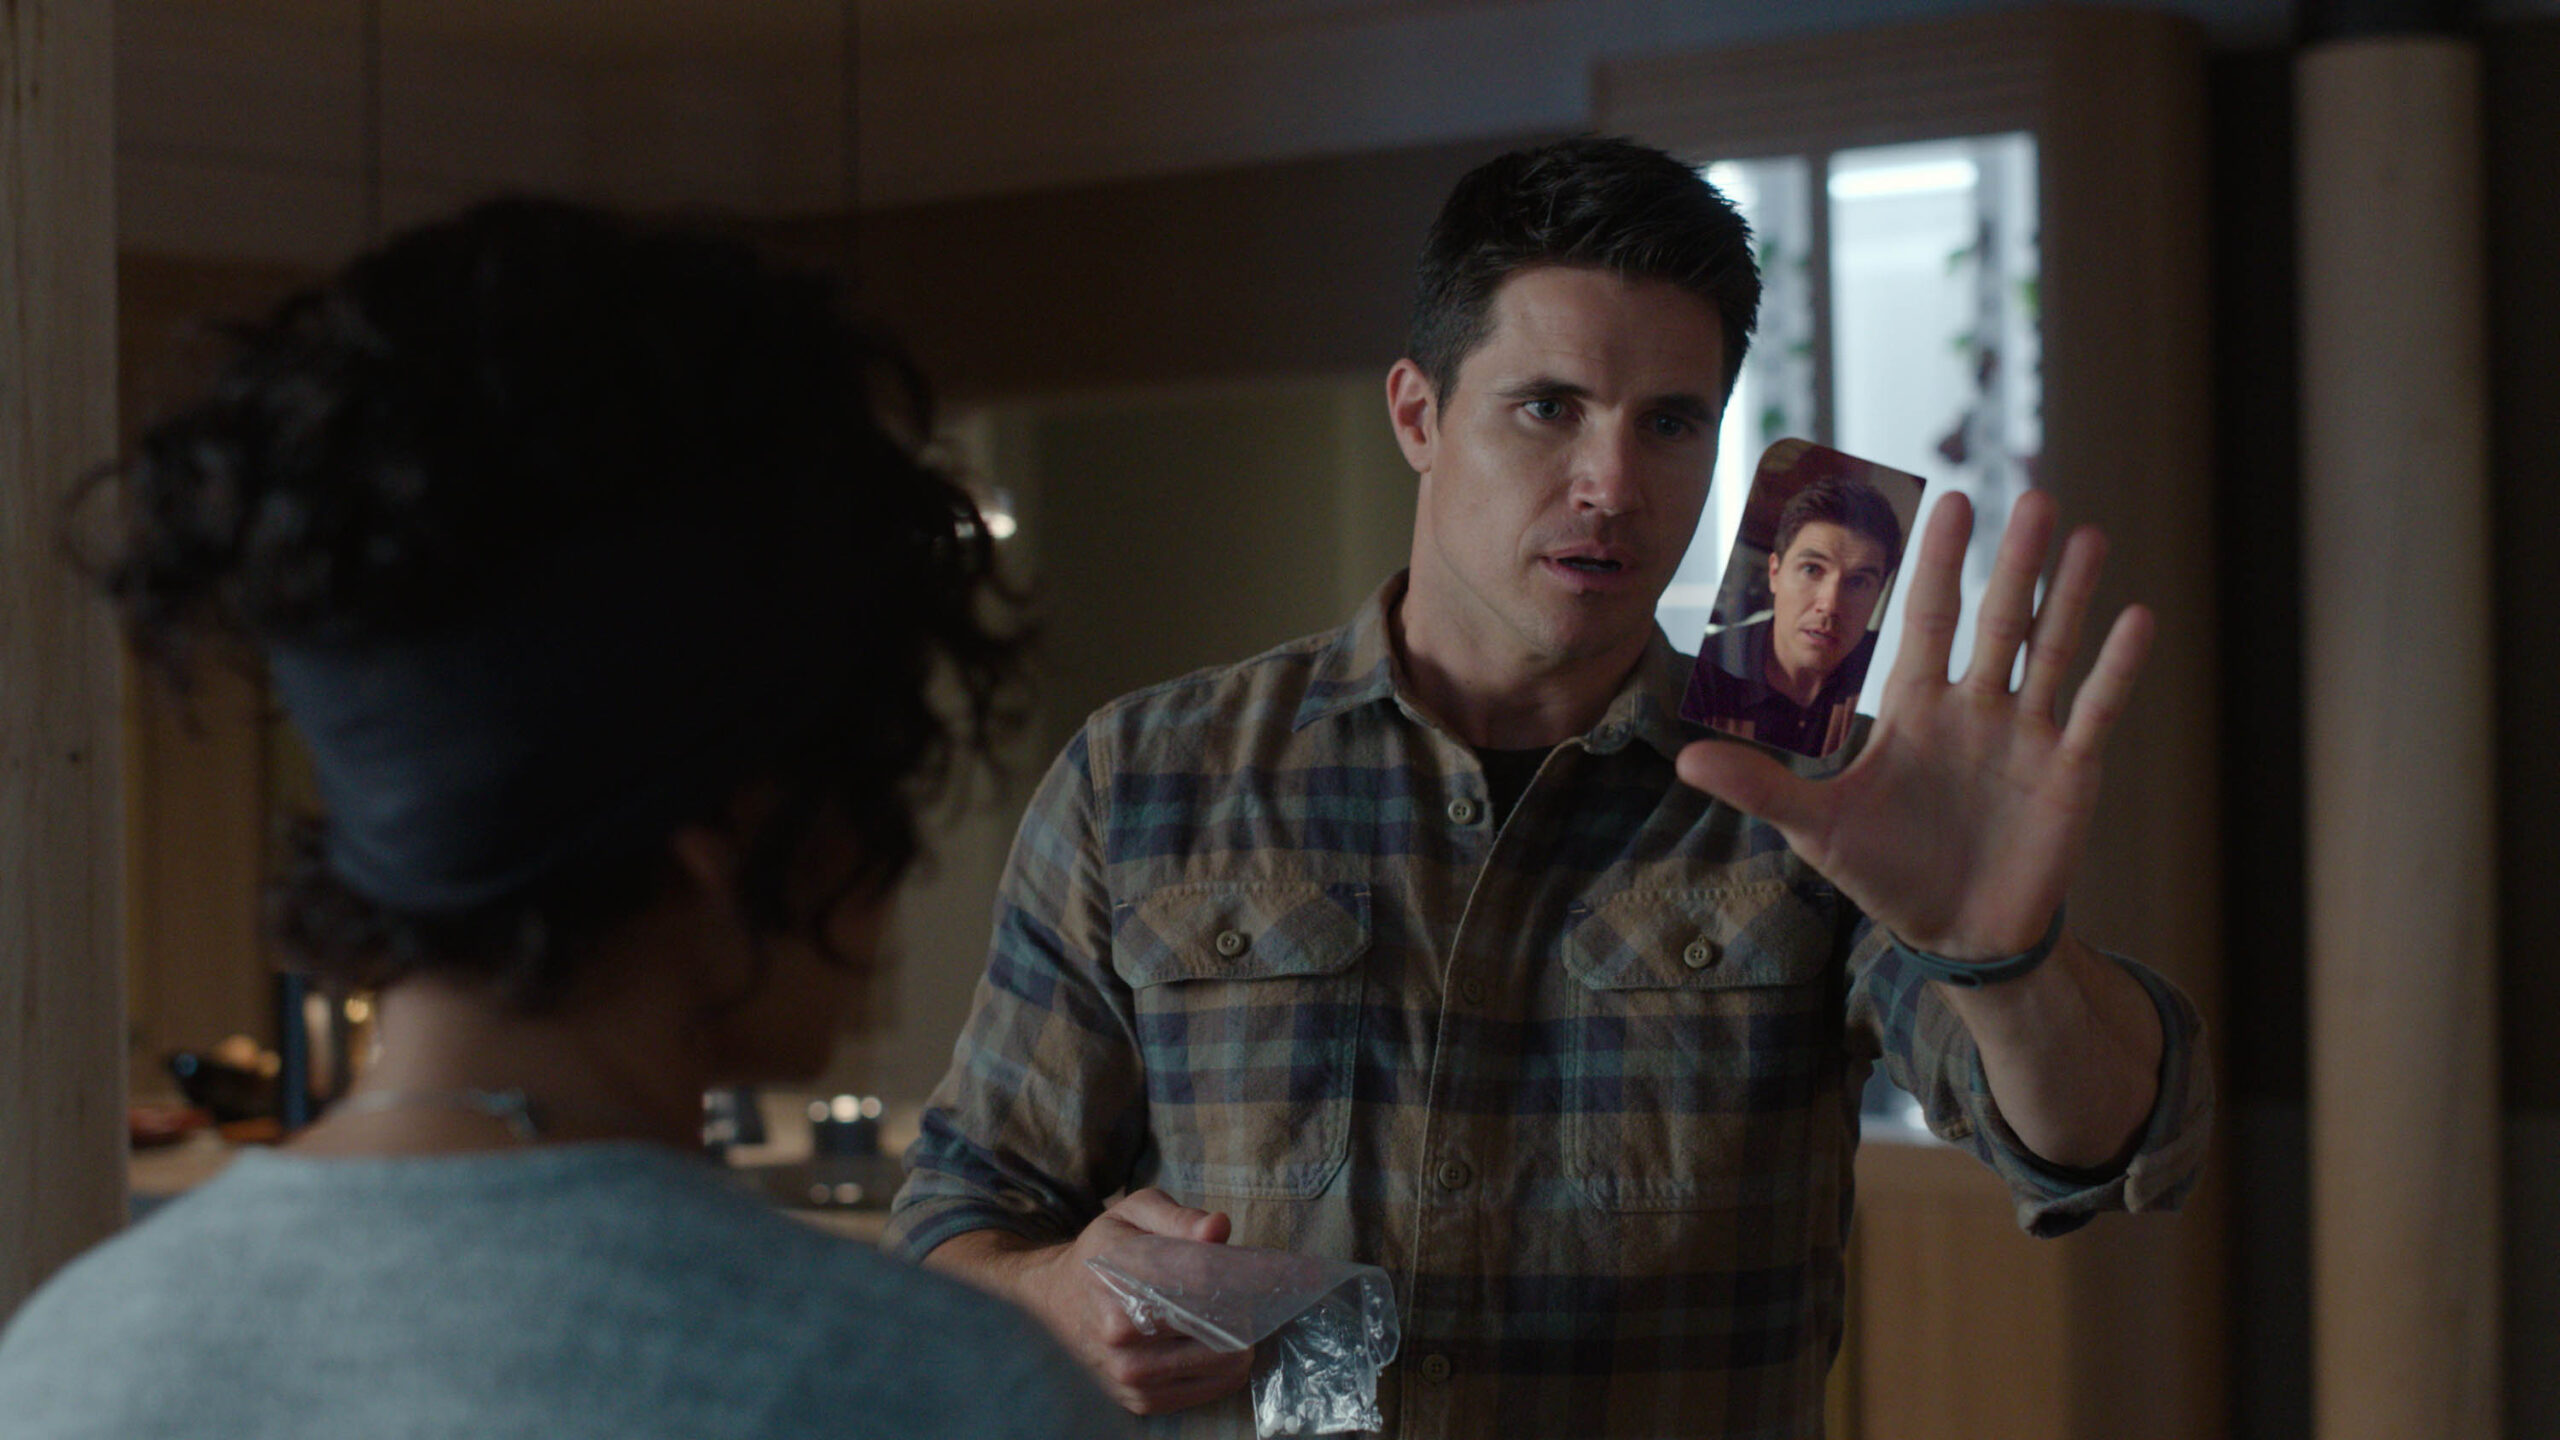 Robbie Amell (Nathan) in Upload - stagione 3 [tag: Robbie Amell] [credit: Copyright Amazon Studios; courtesy of Prime Video]